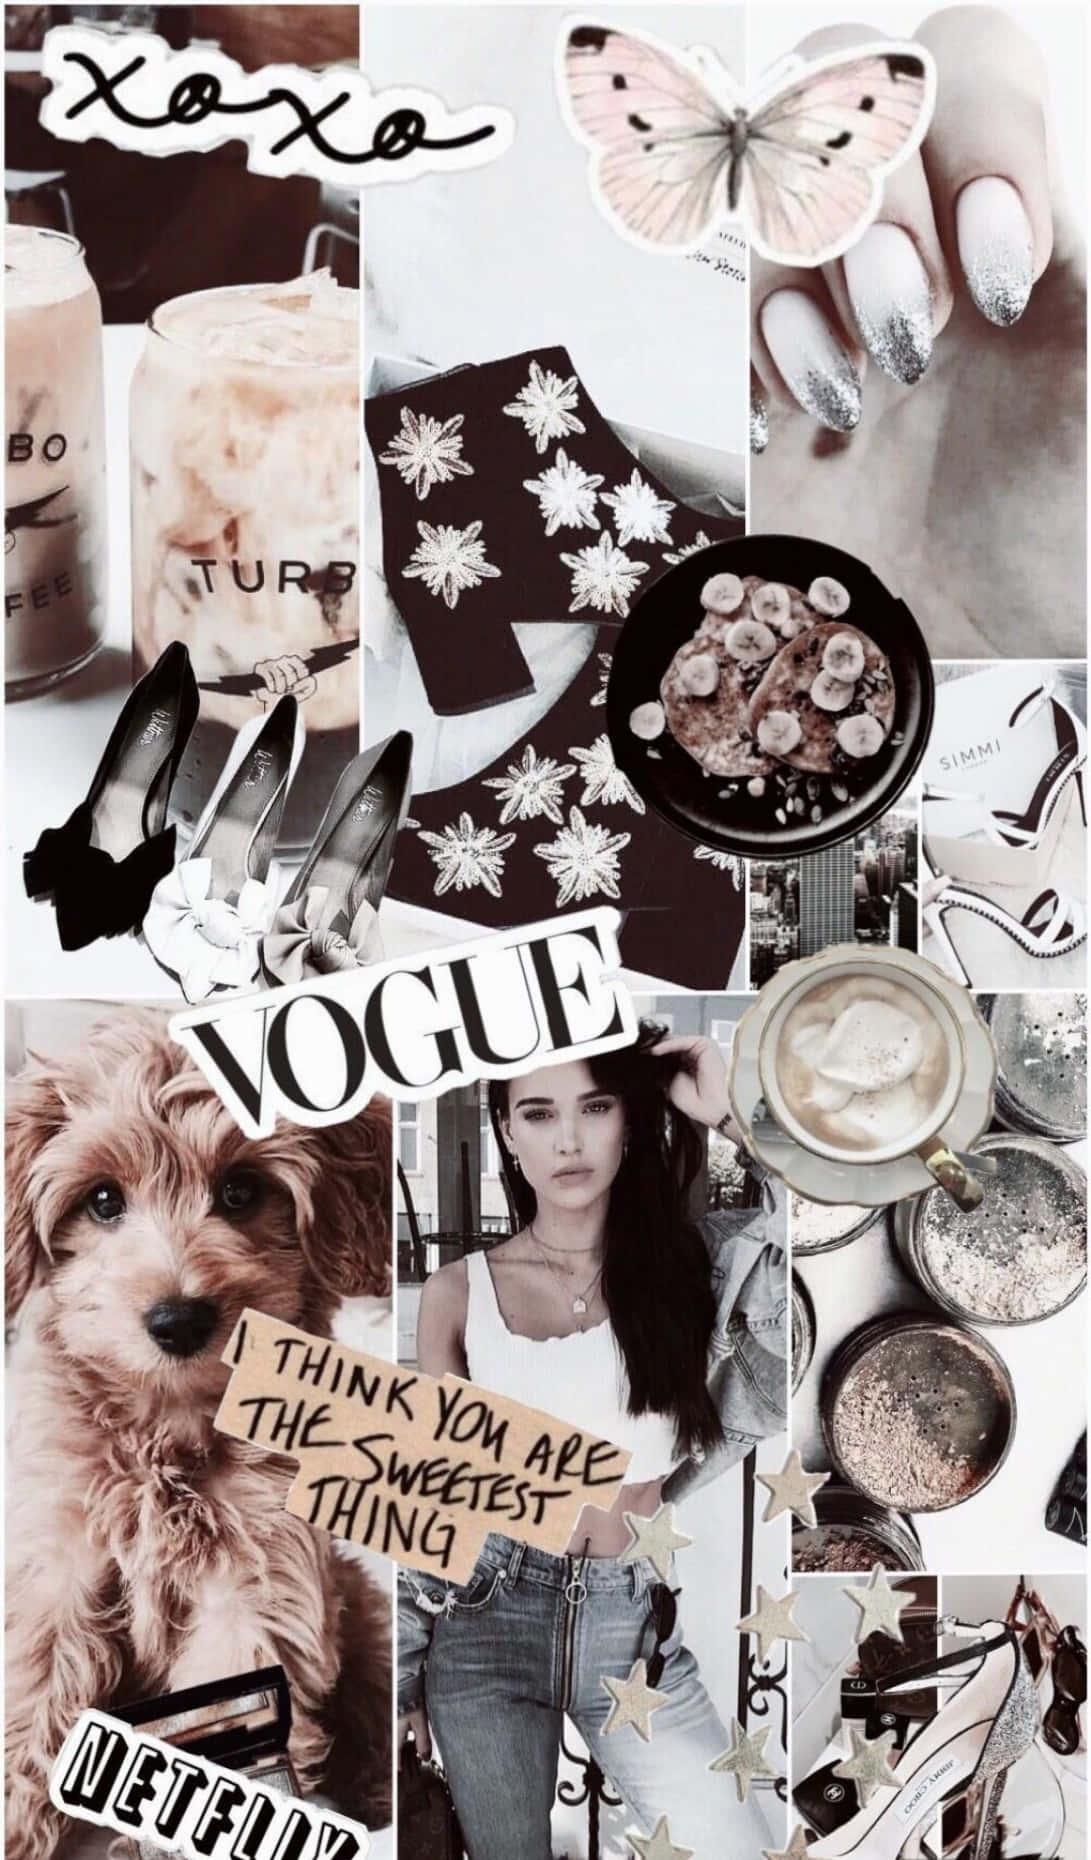 Iphone Collage With Coffee And Vogue Text Wallpaper